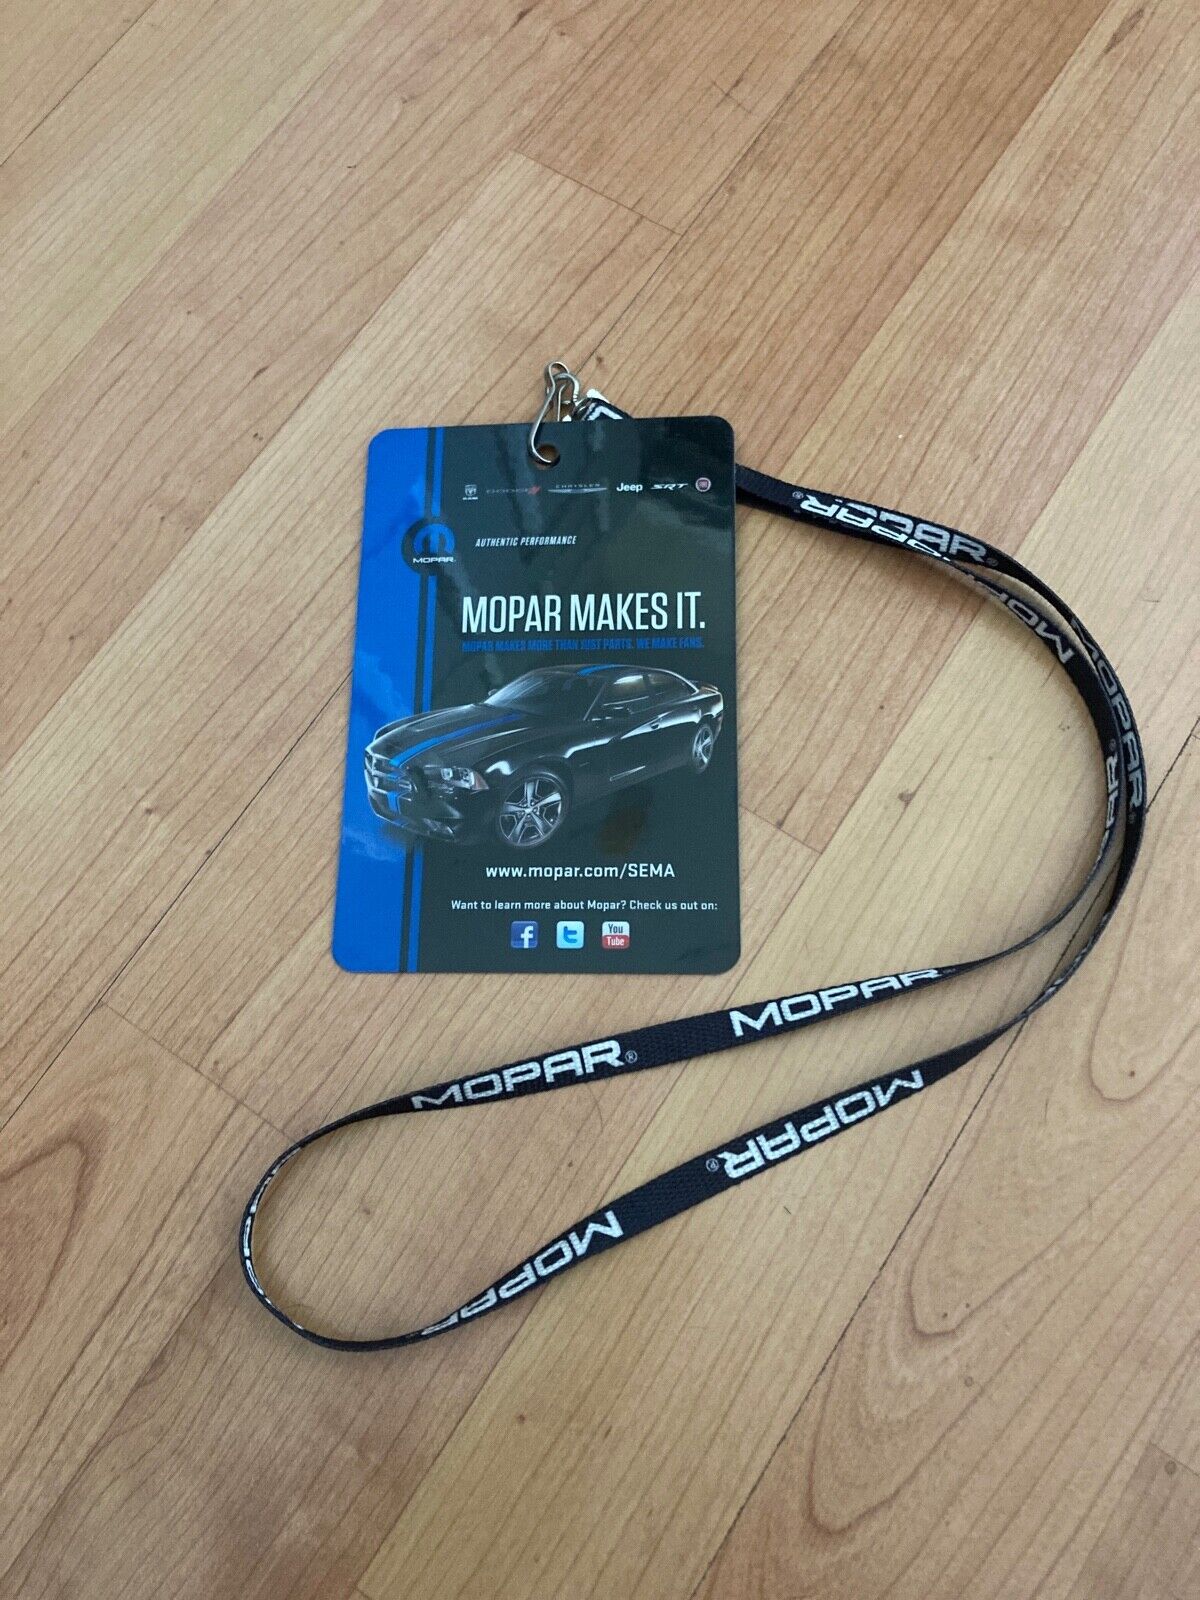 MOPAR MAKES IT KEYCHAIN BADGE AND LANYARD FROM SEAMA SHOW 